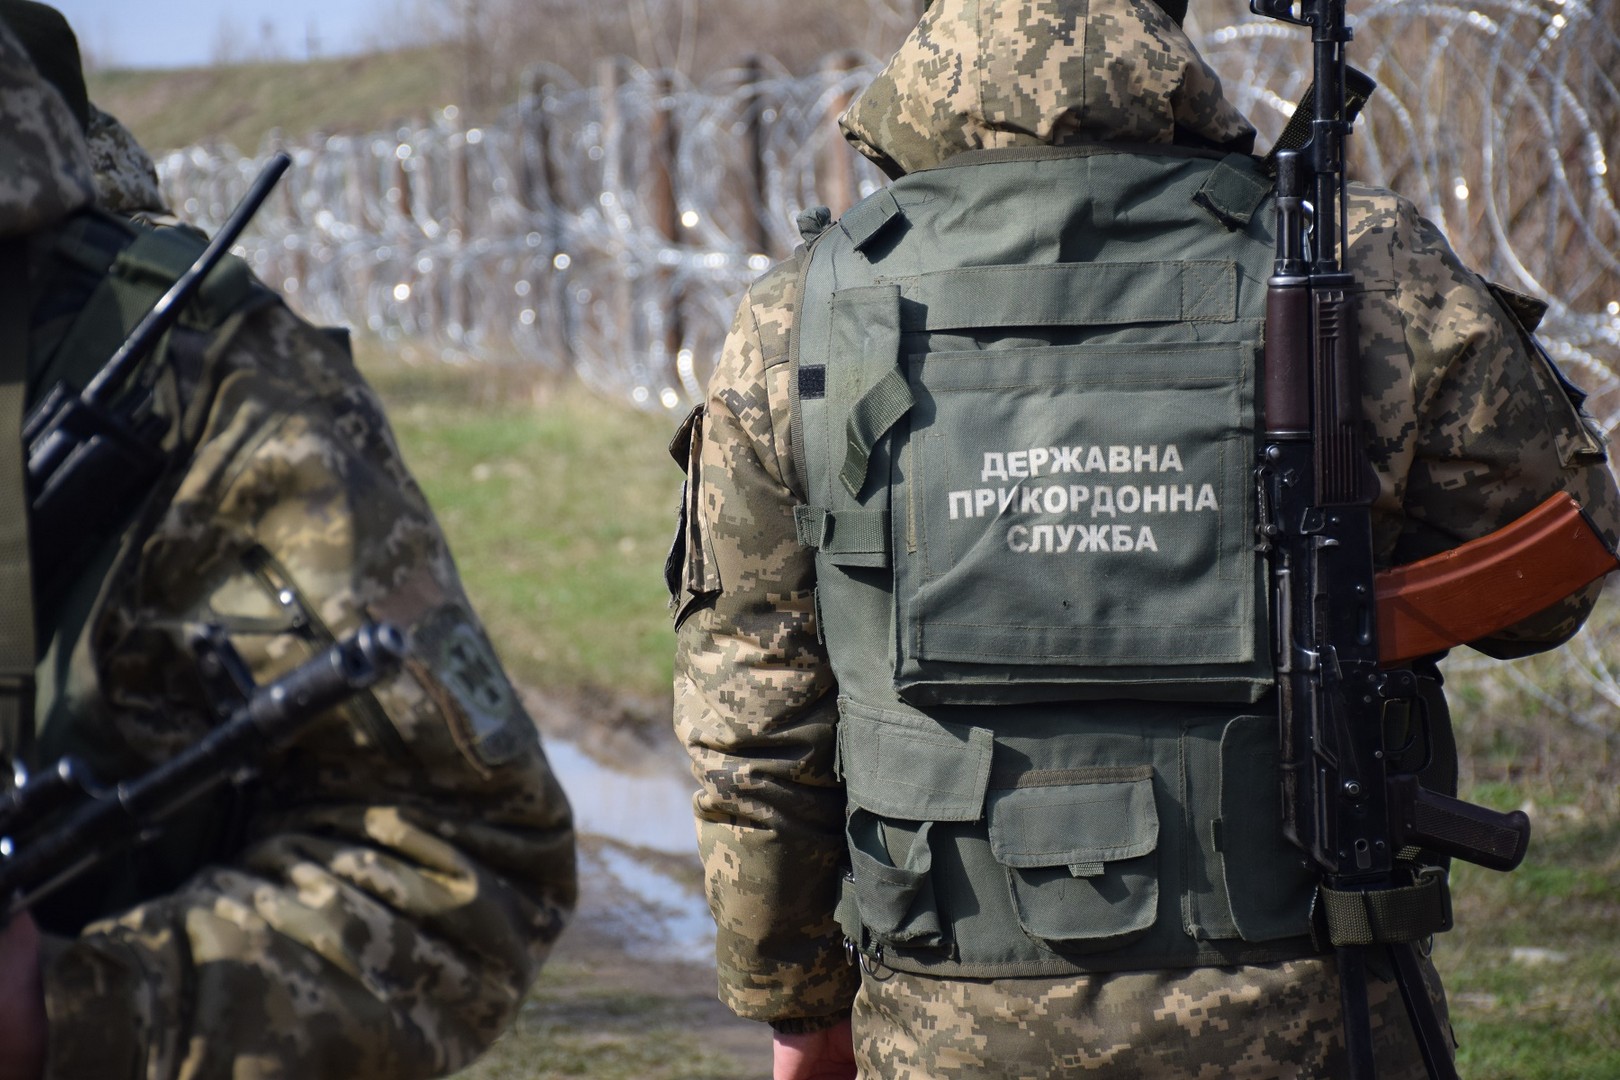 Servicemen of the State Border Guard Service of Ukraine used weapon to stop  violators